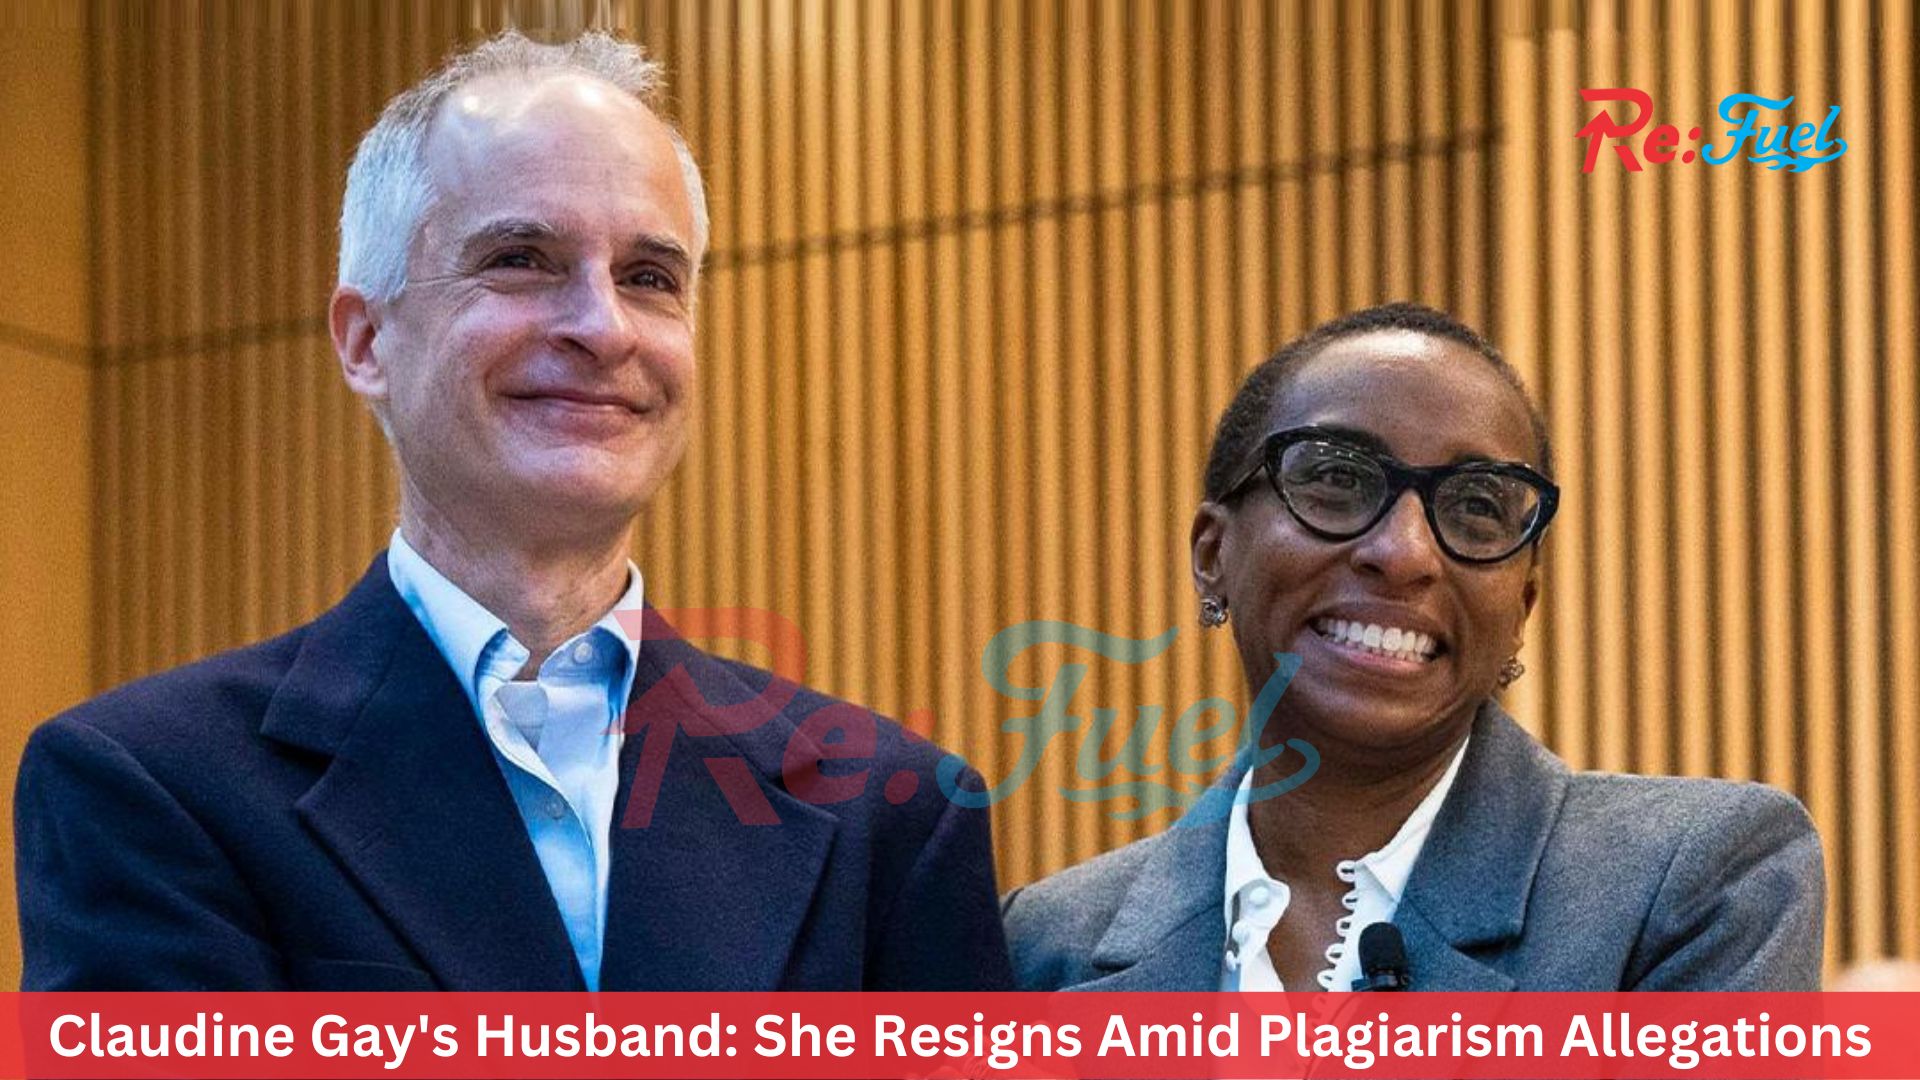 Claudine Gay's Husband: She Resigns Amid Plagiarism Allegations